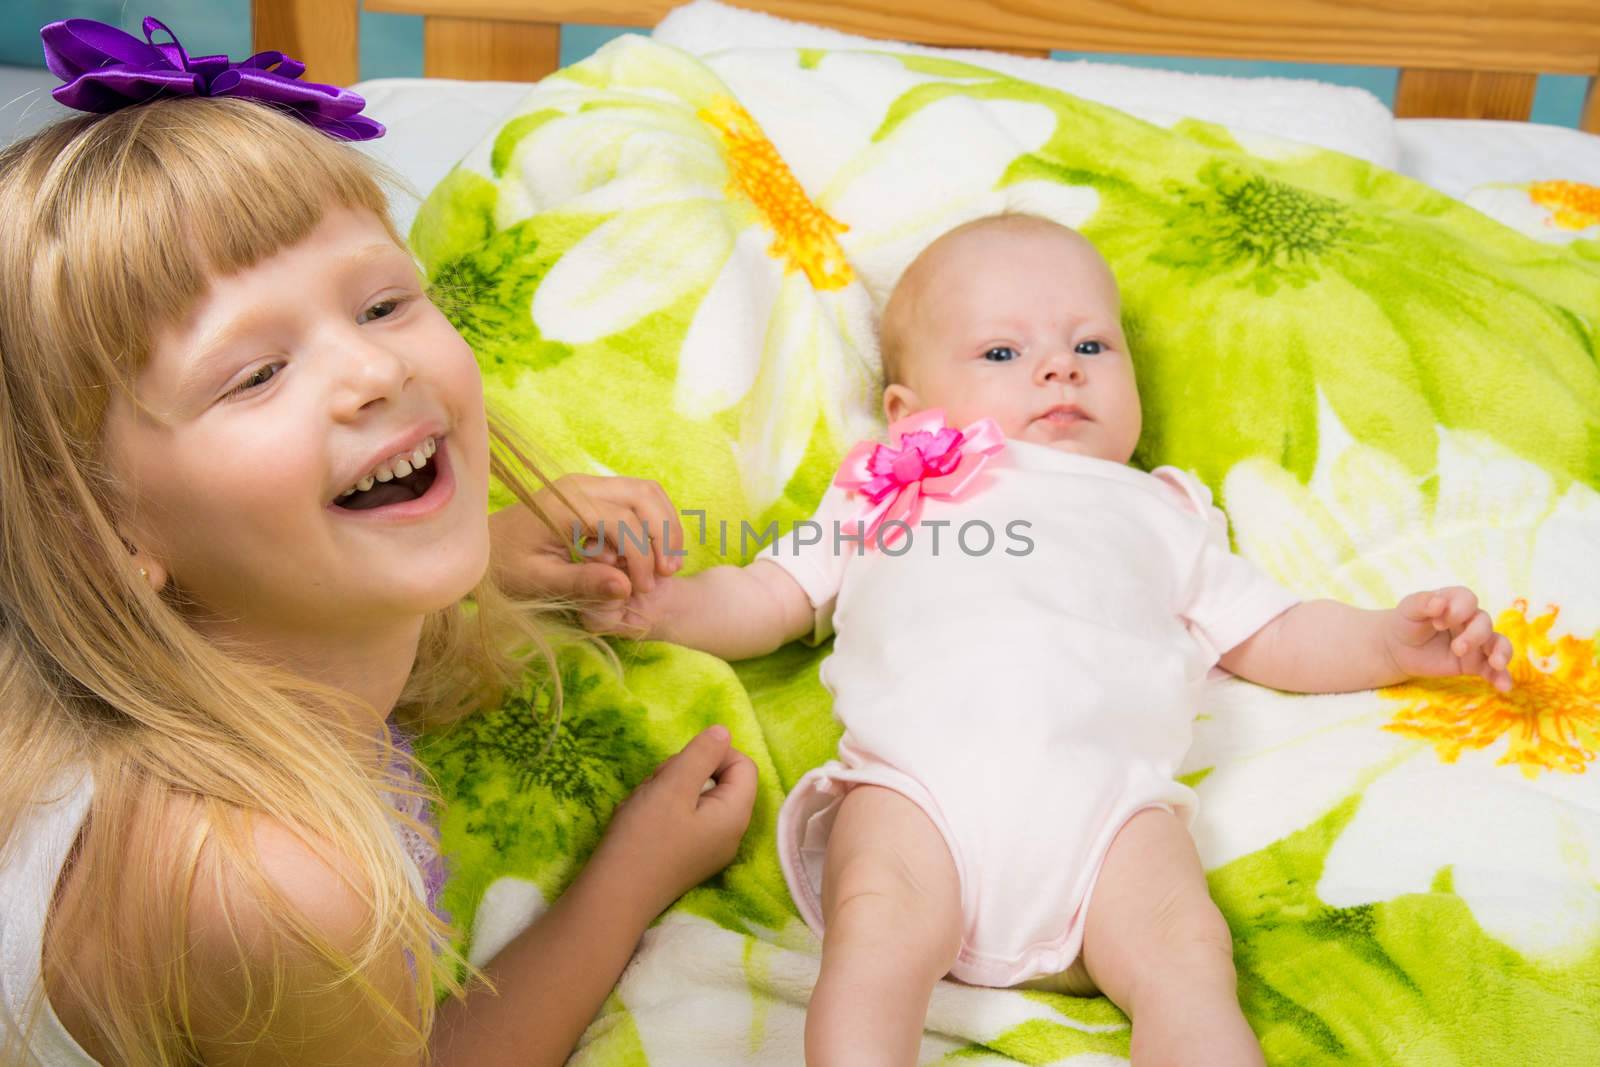 The five-year daughter sitting in the crib on the bed lying on her back a two-month baby